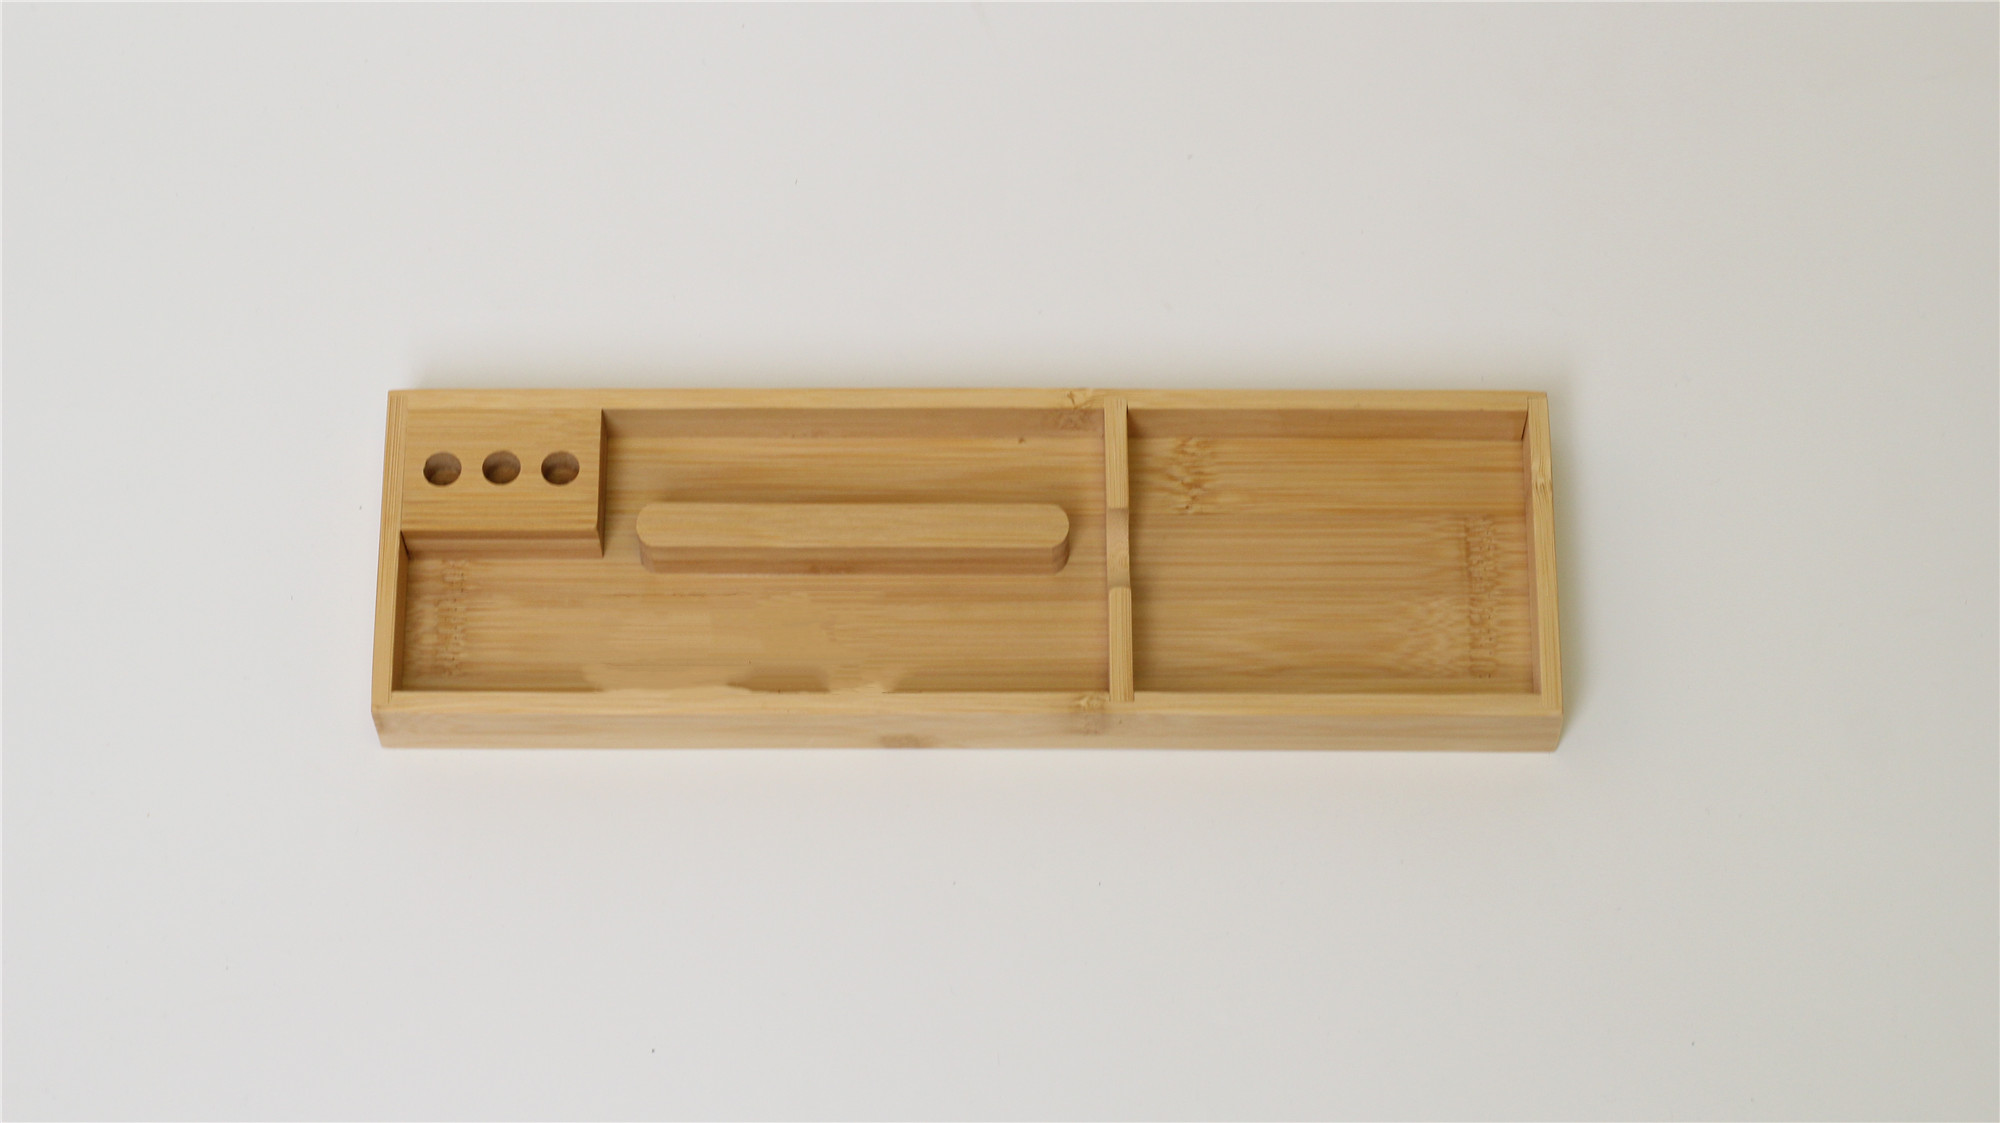 Bamboo and wood tray pen container